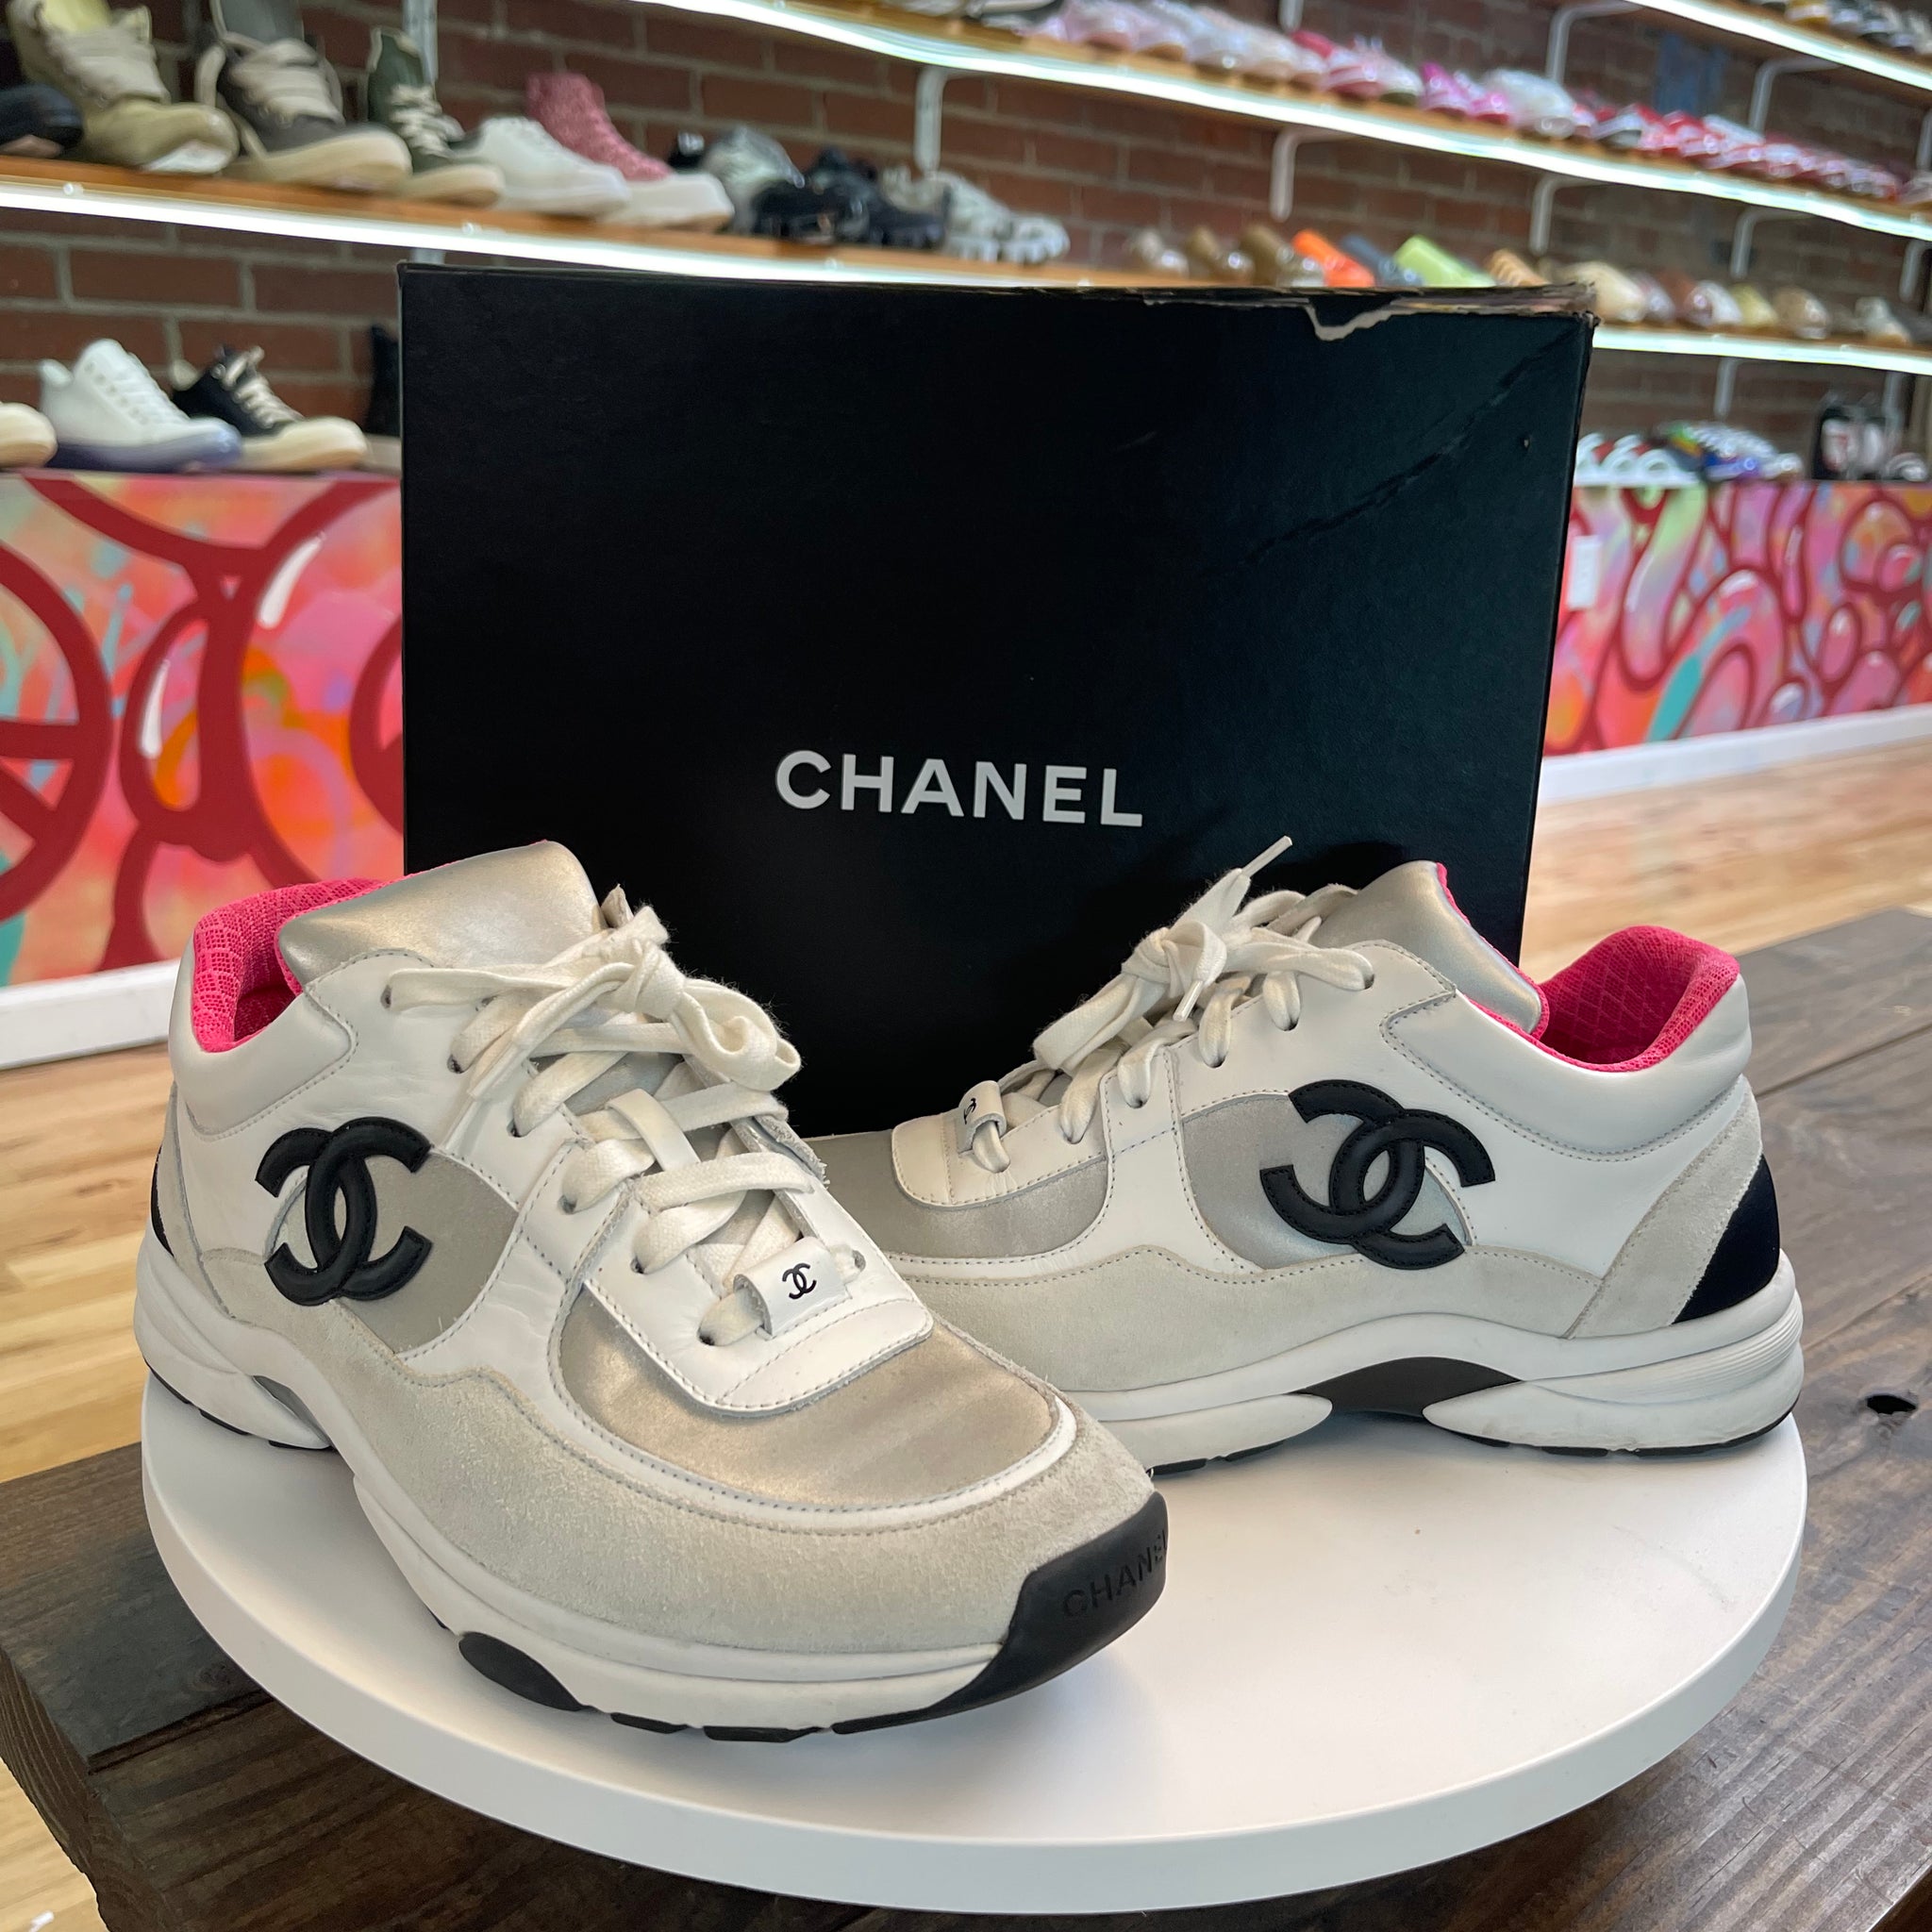 Chanel Trainers "White/Black/Pink"